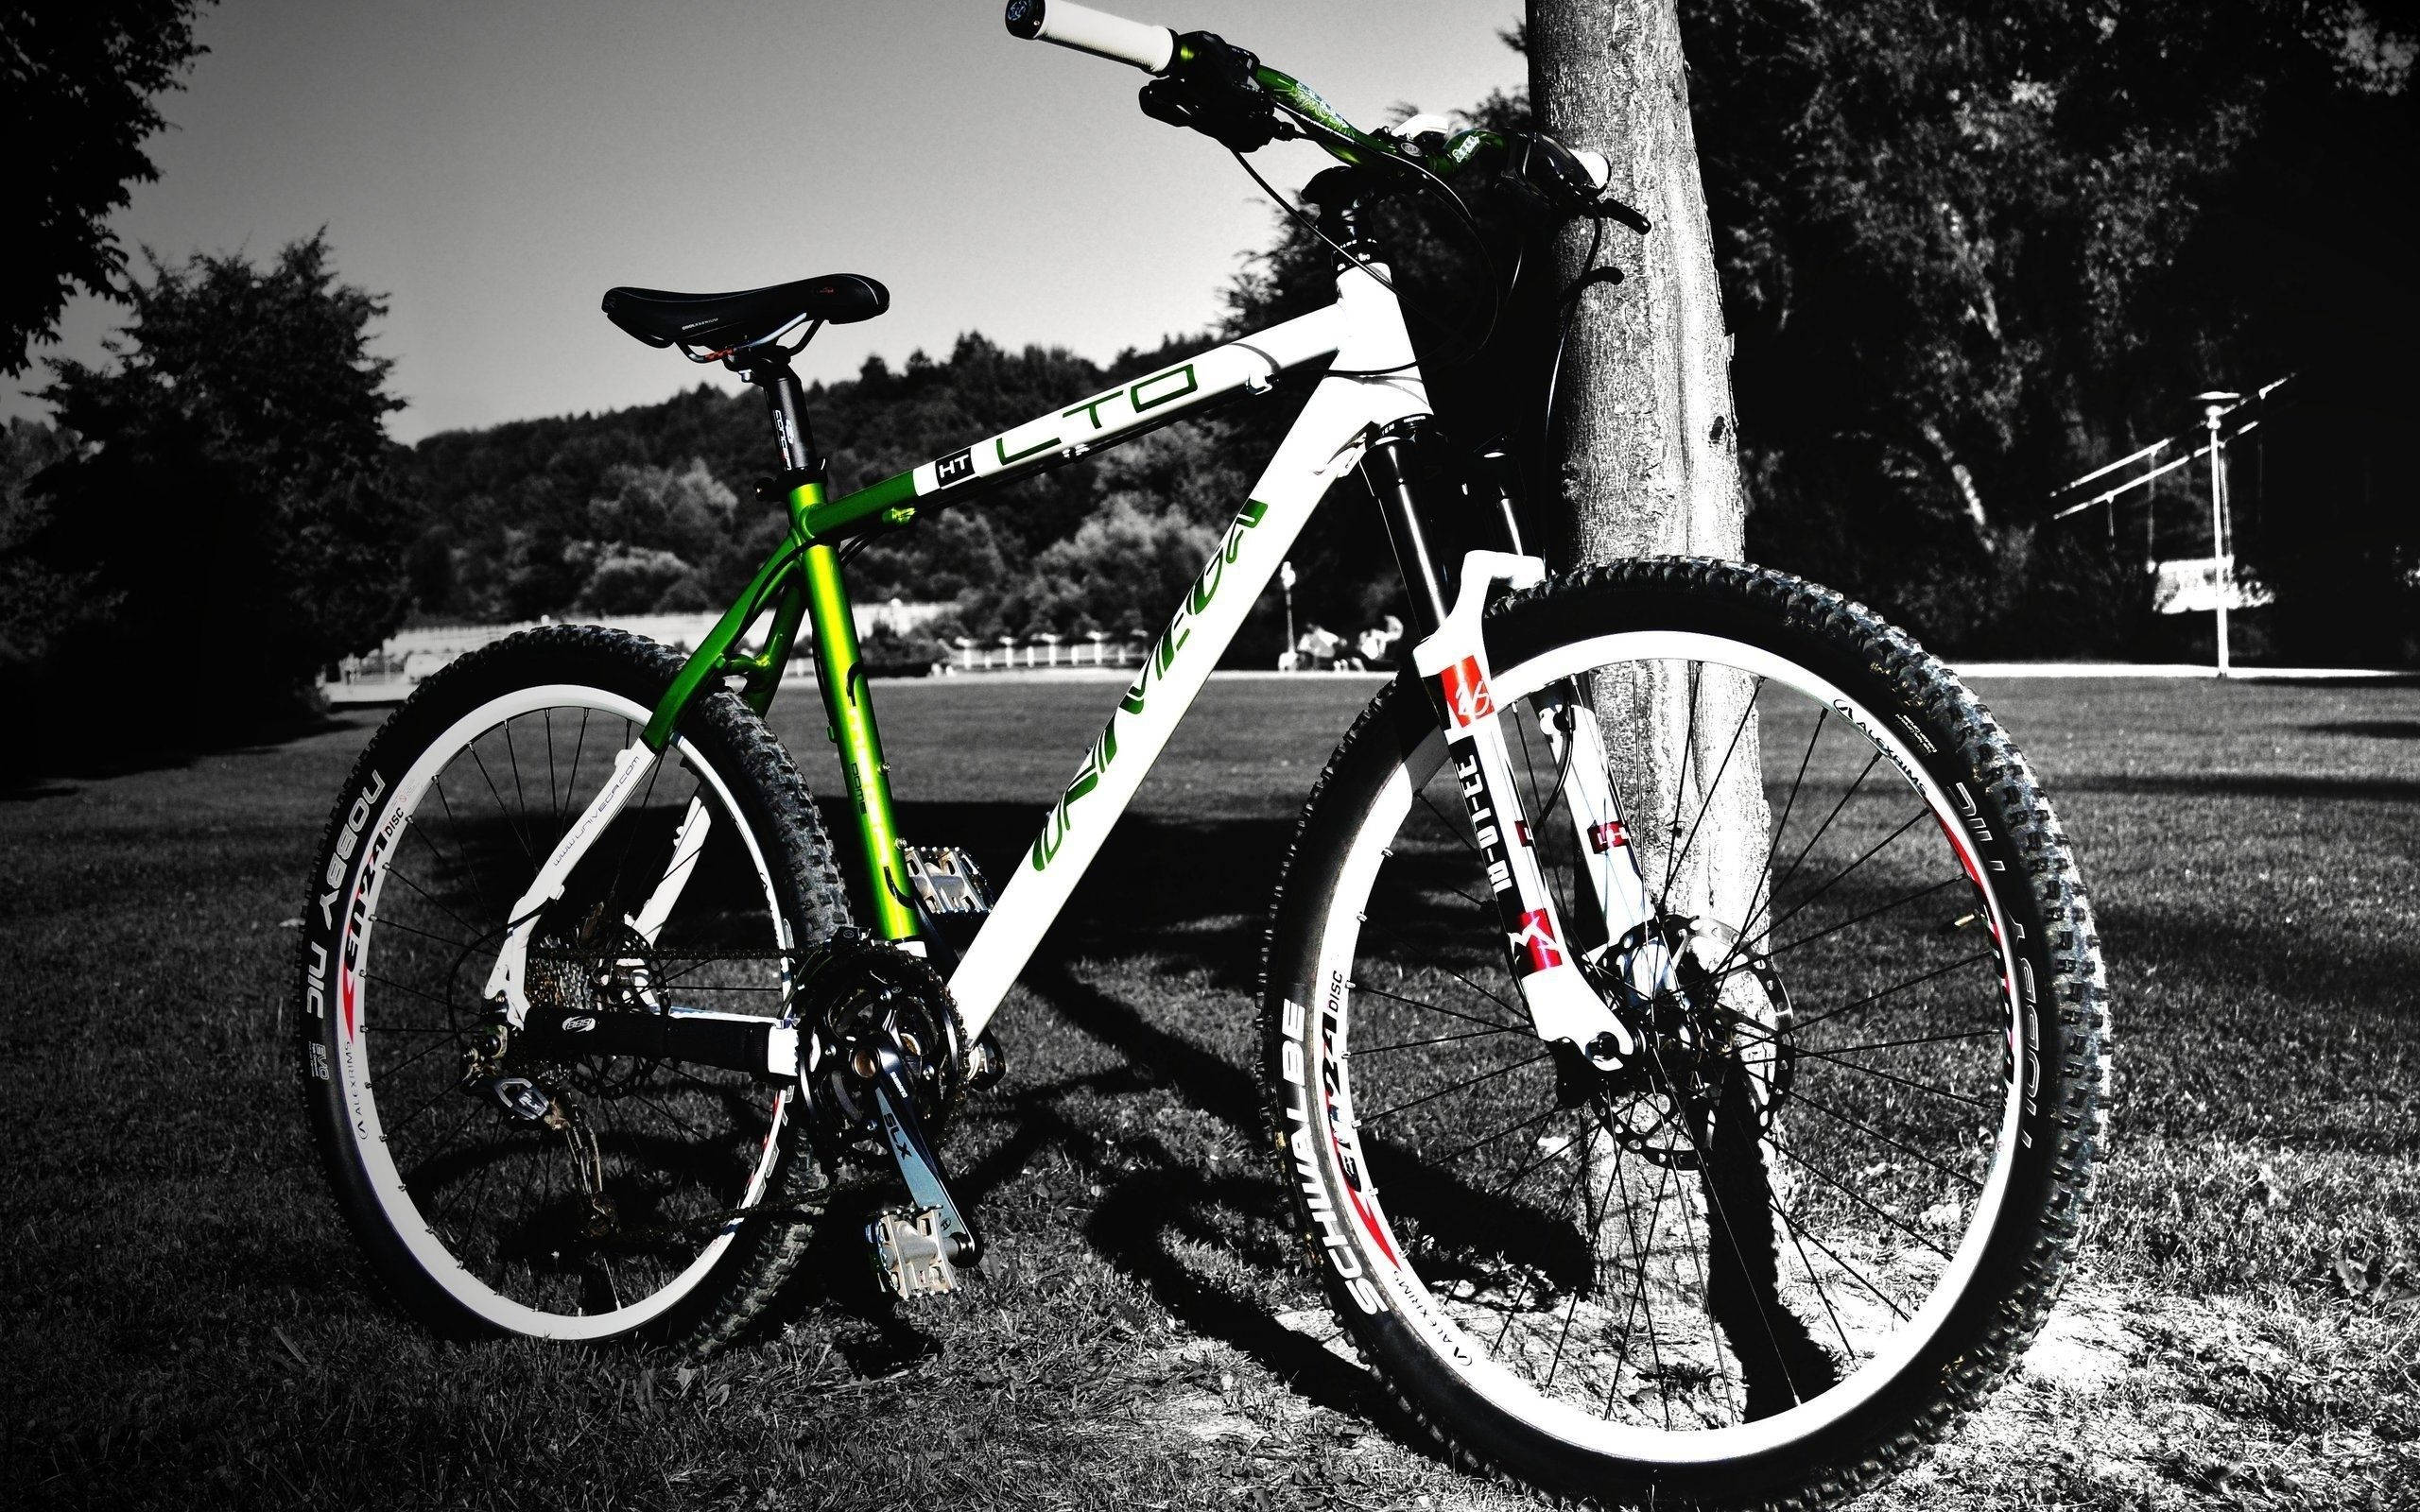 Grayscale Mtb In Tree Park